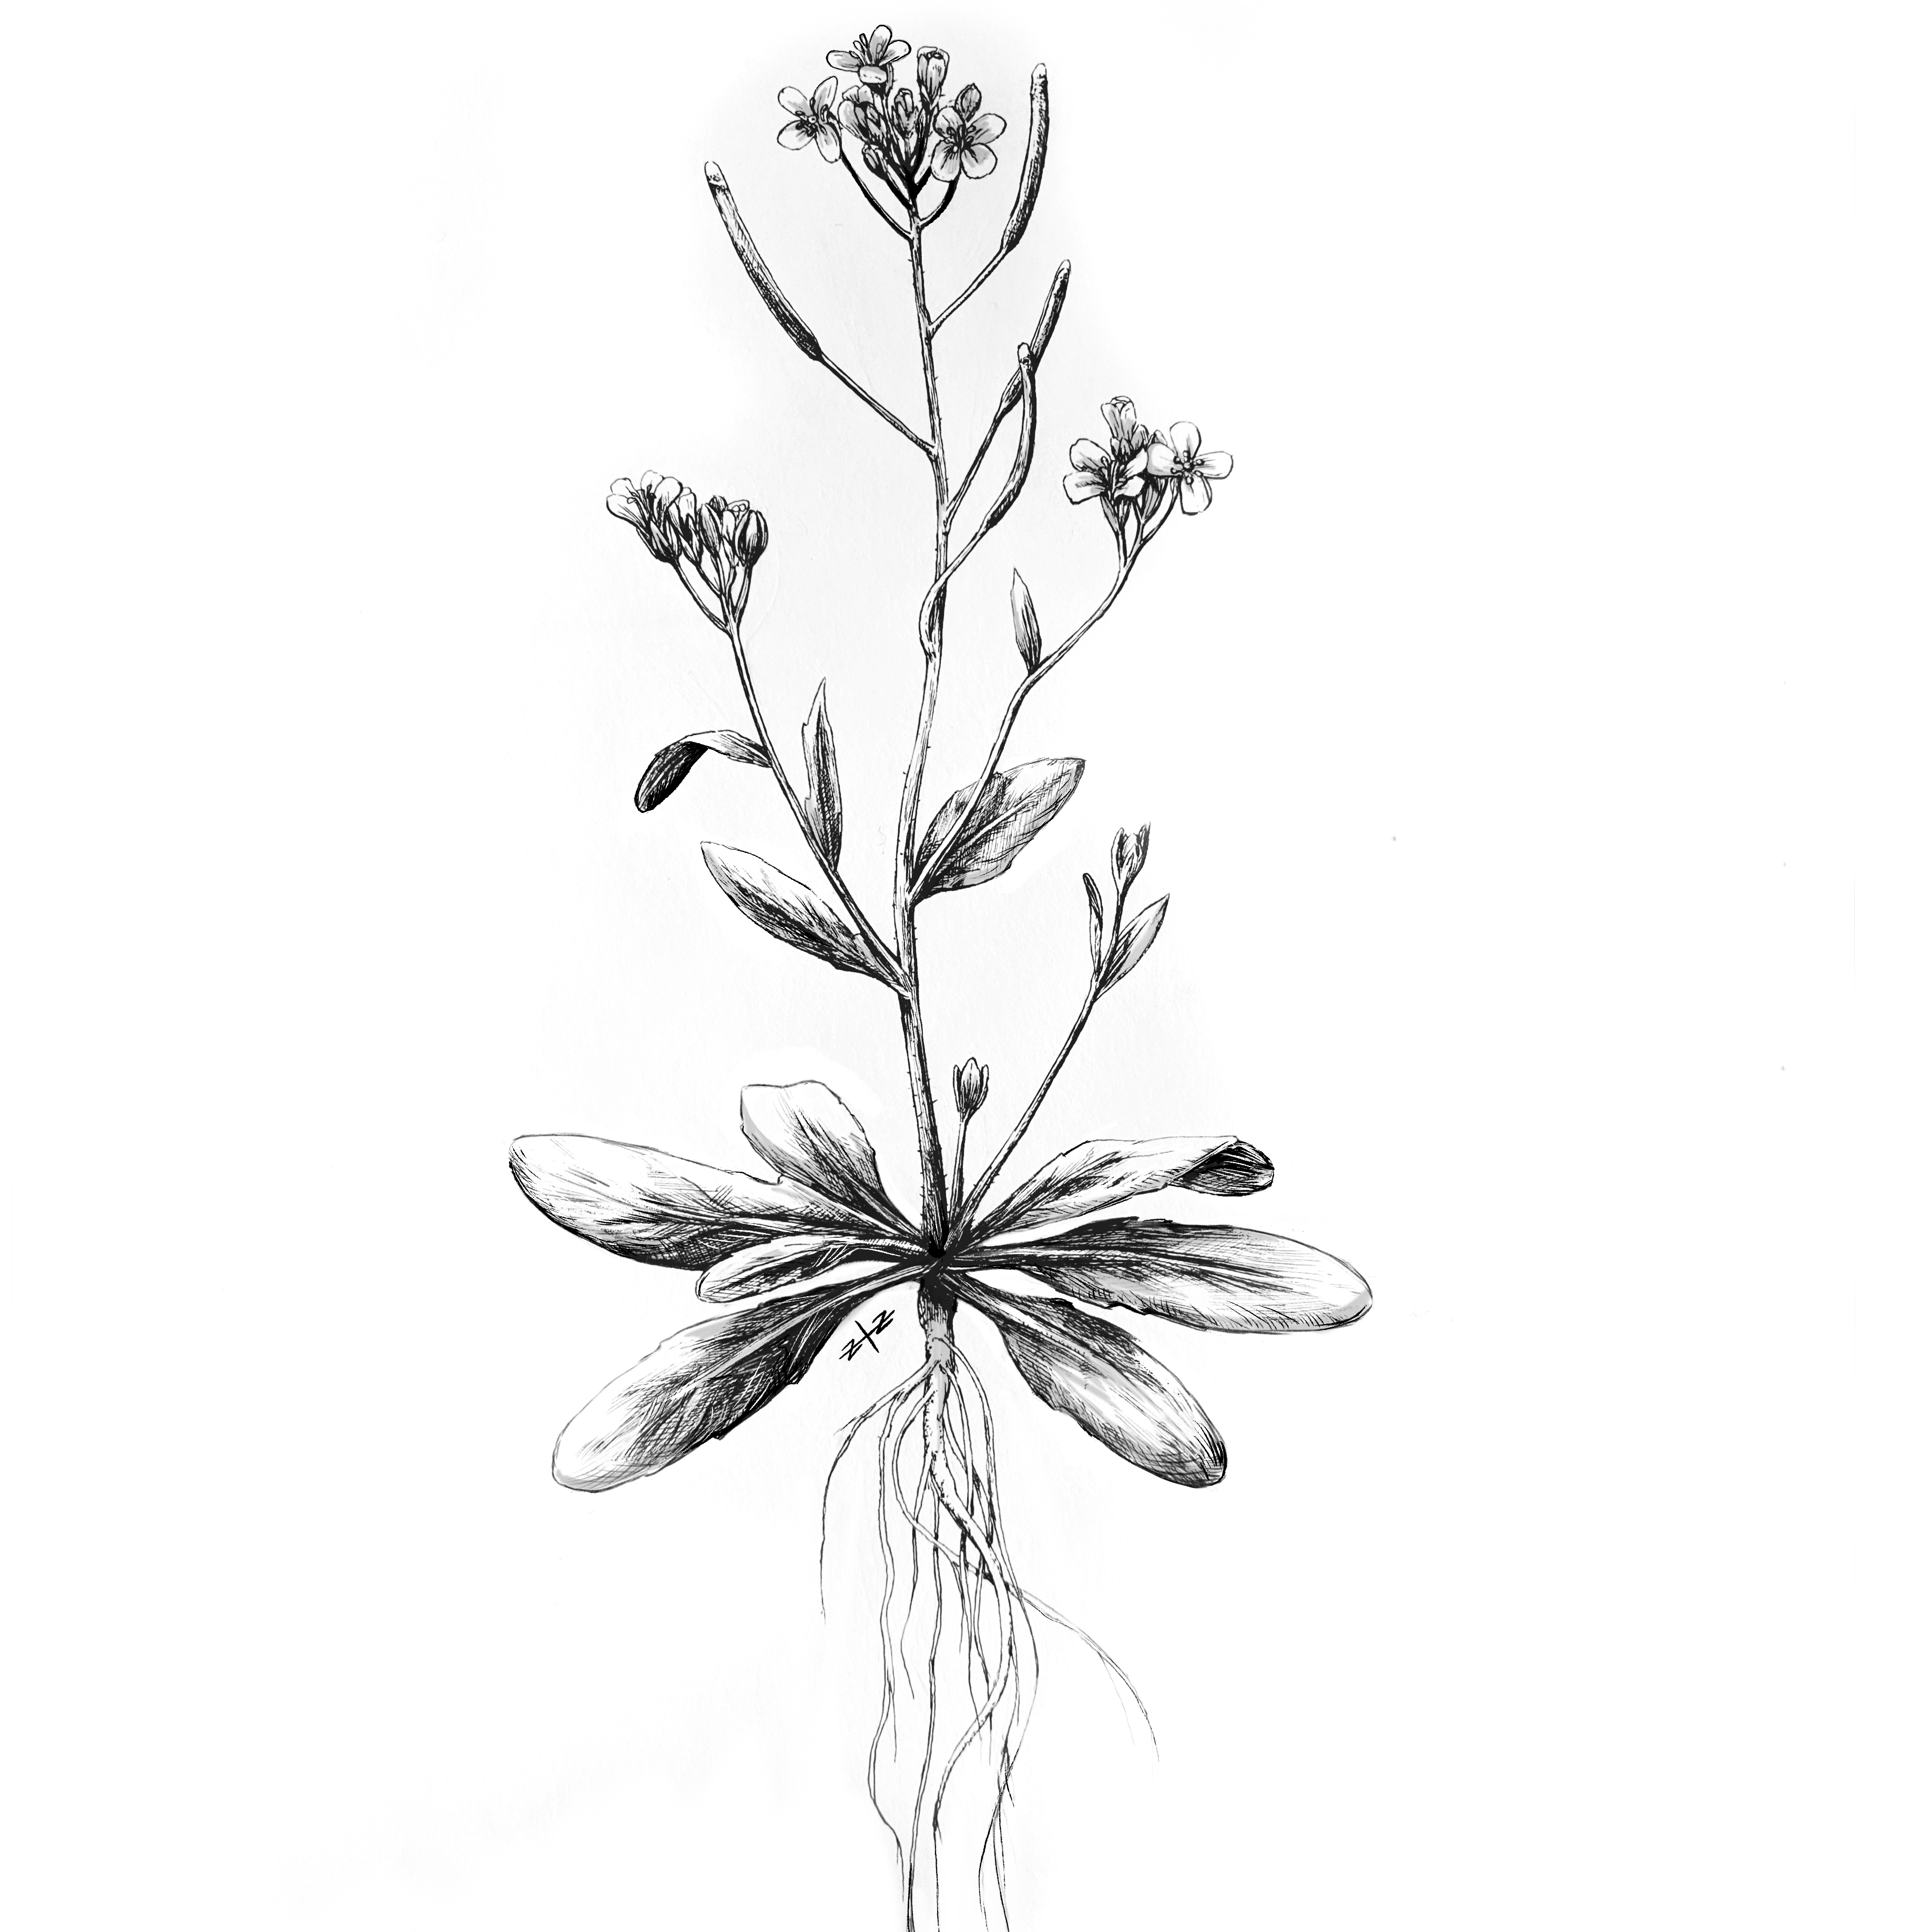 Arabidopsis graphic by Zoe Zorn CC BY 4.0